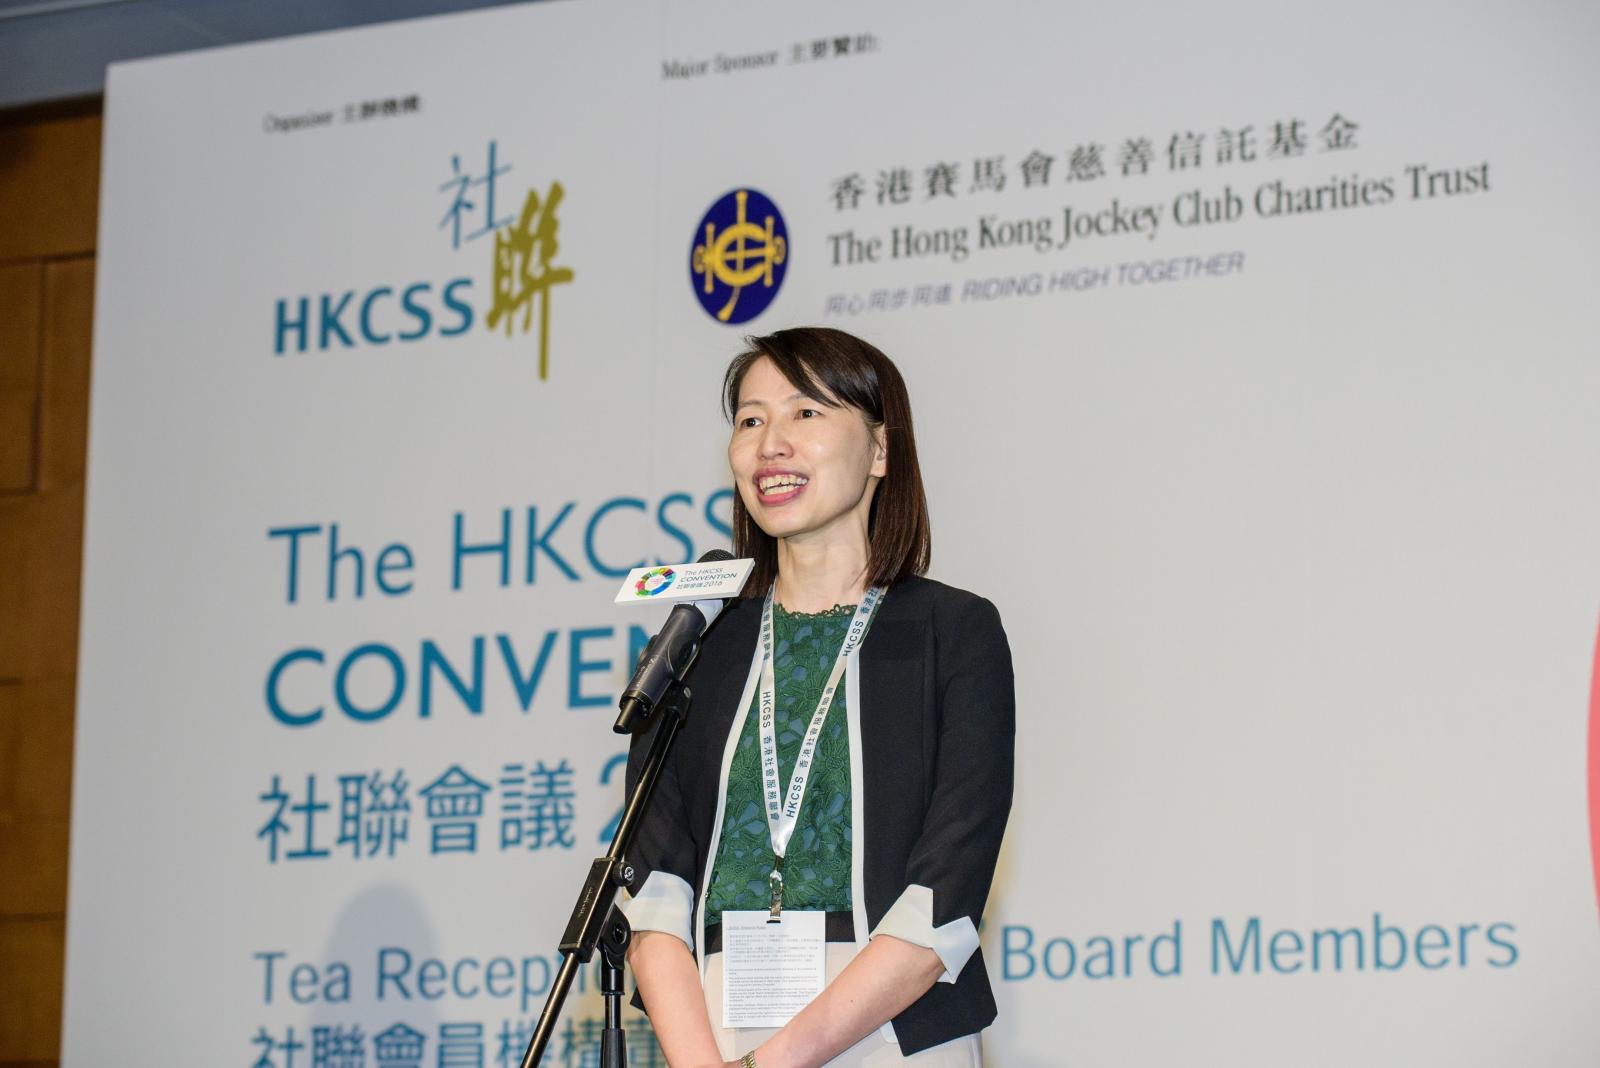 Ms Carol YIP, Director of Social Welfare, believes that the birth of this network can help boards of social services organizations better respond to public request for effective monitoring and high accountability of organizations.